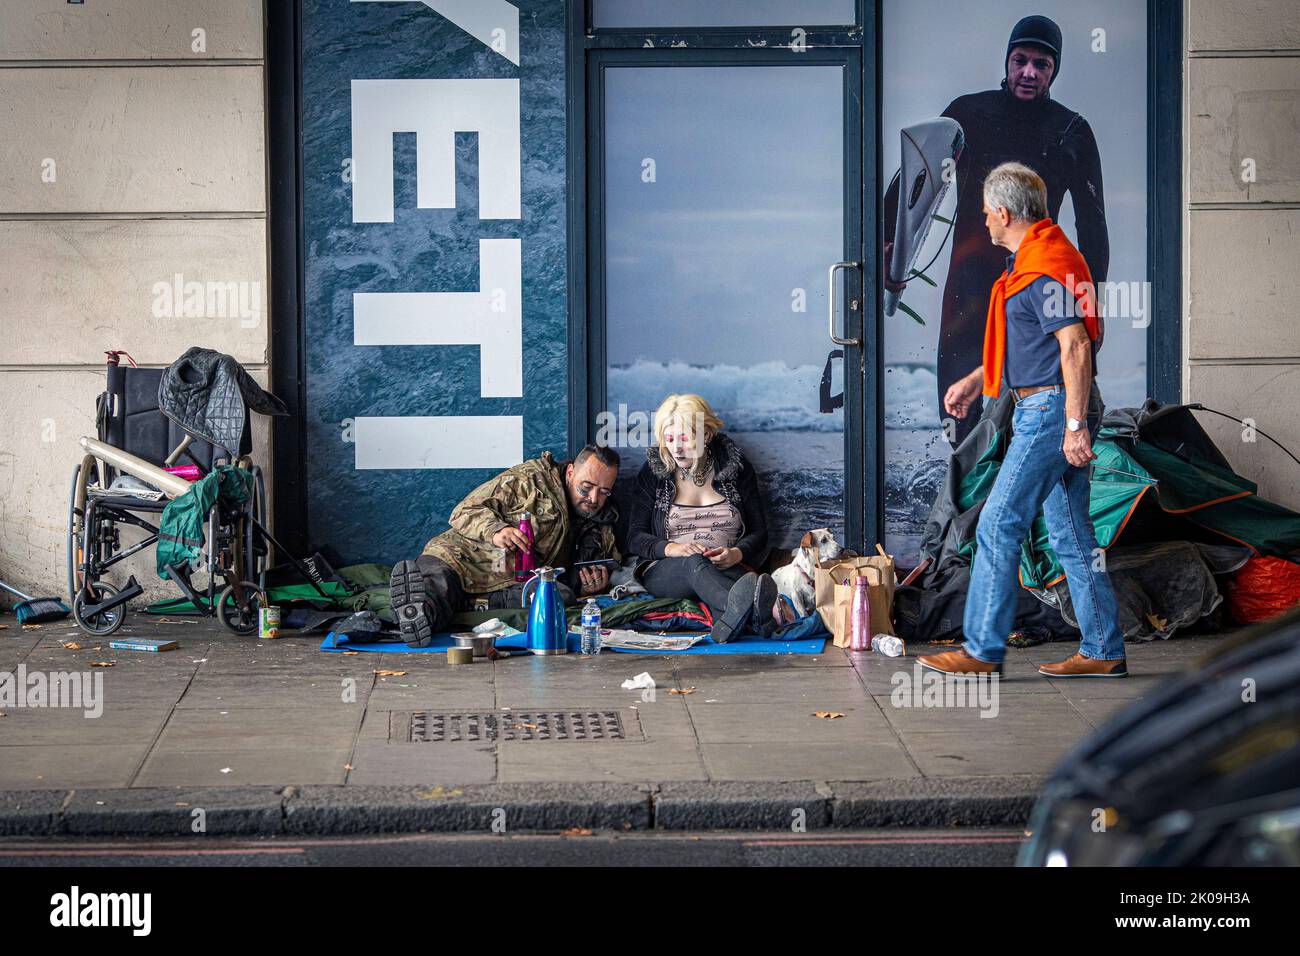 London UK 10th September 2022 - Young homeless couple watch King Charles III accession speech on smartphone in and a member of the public can be seen walking past.King Charles III was also proclaimed as monarch today.Photo Horst A. Friedrichs Alamy Live News Stock Photo